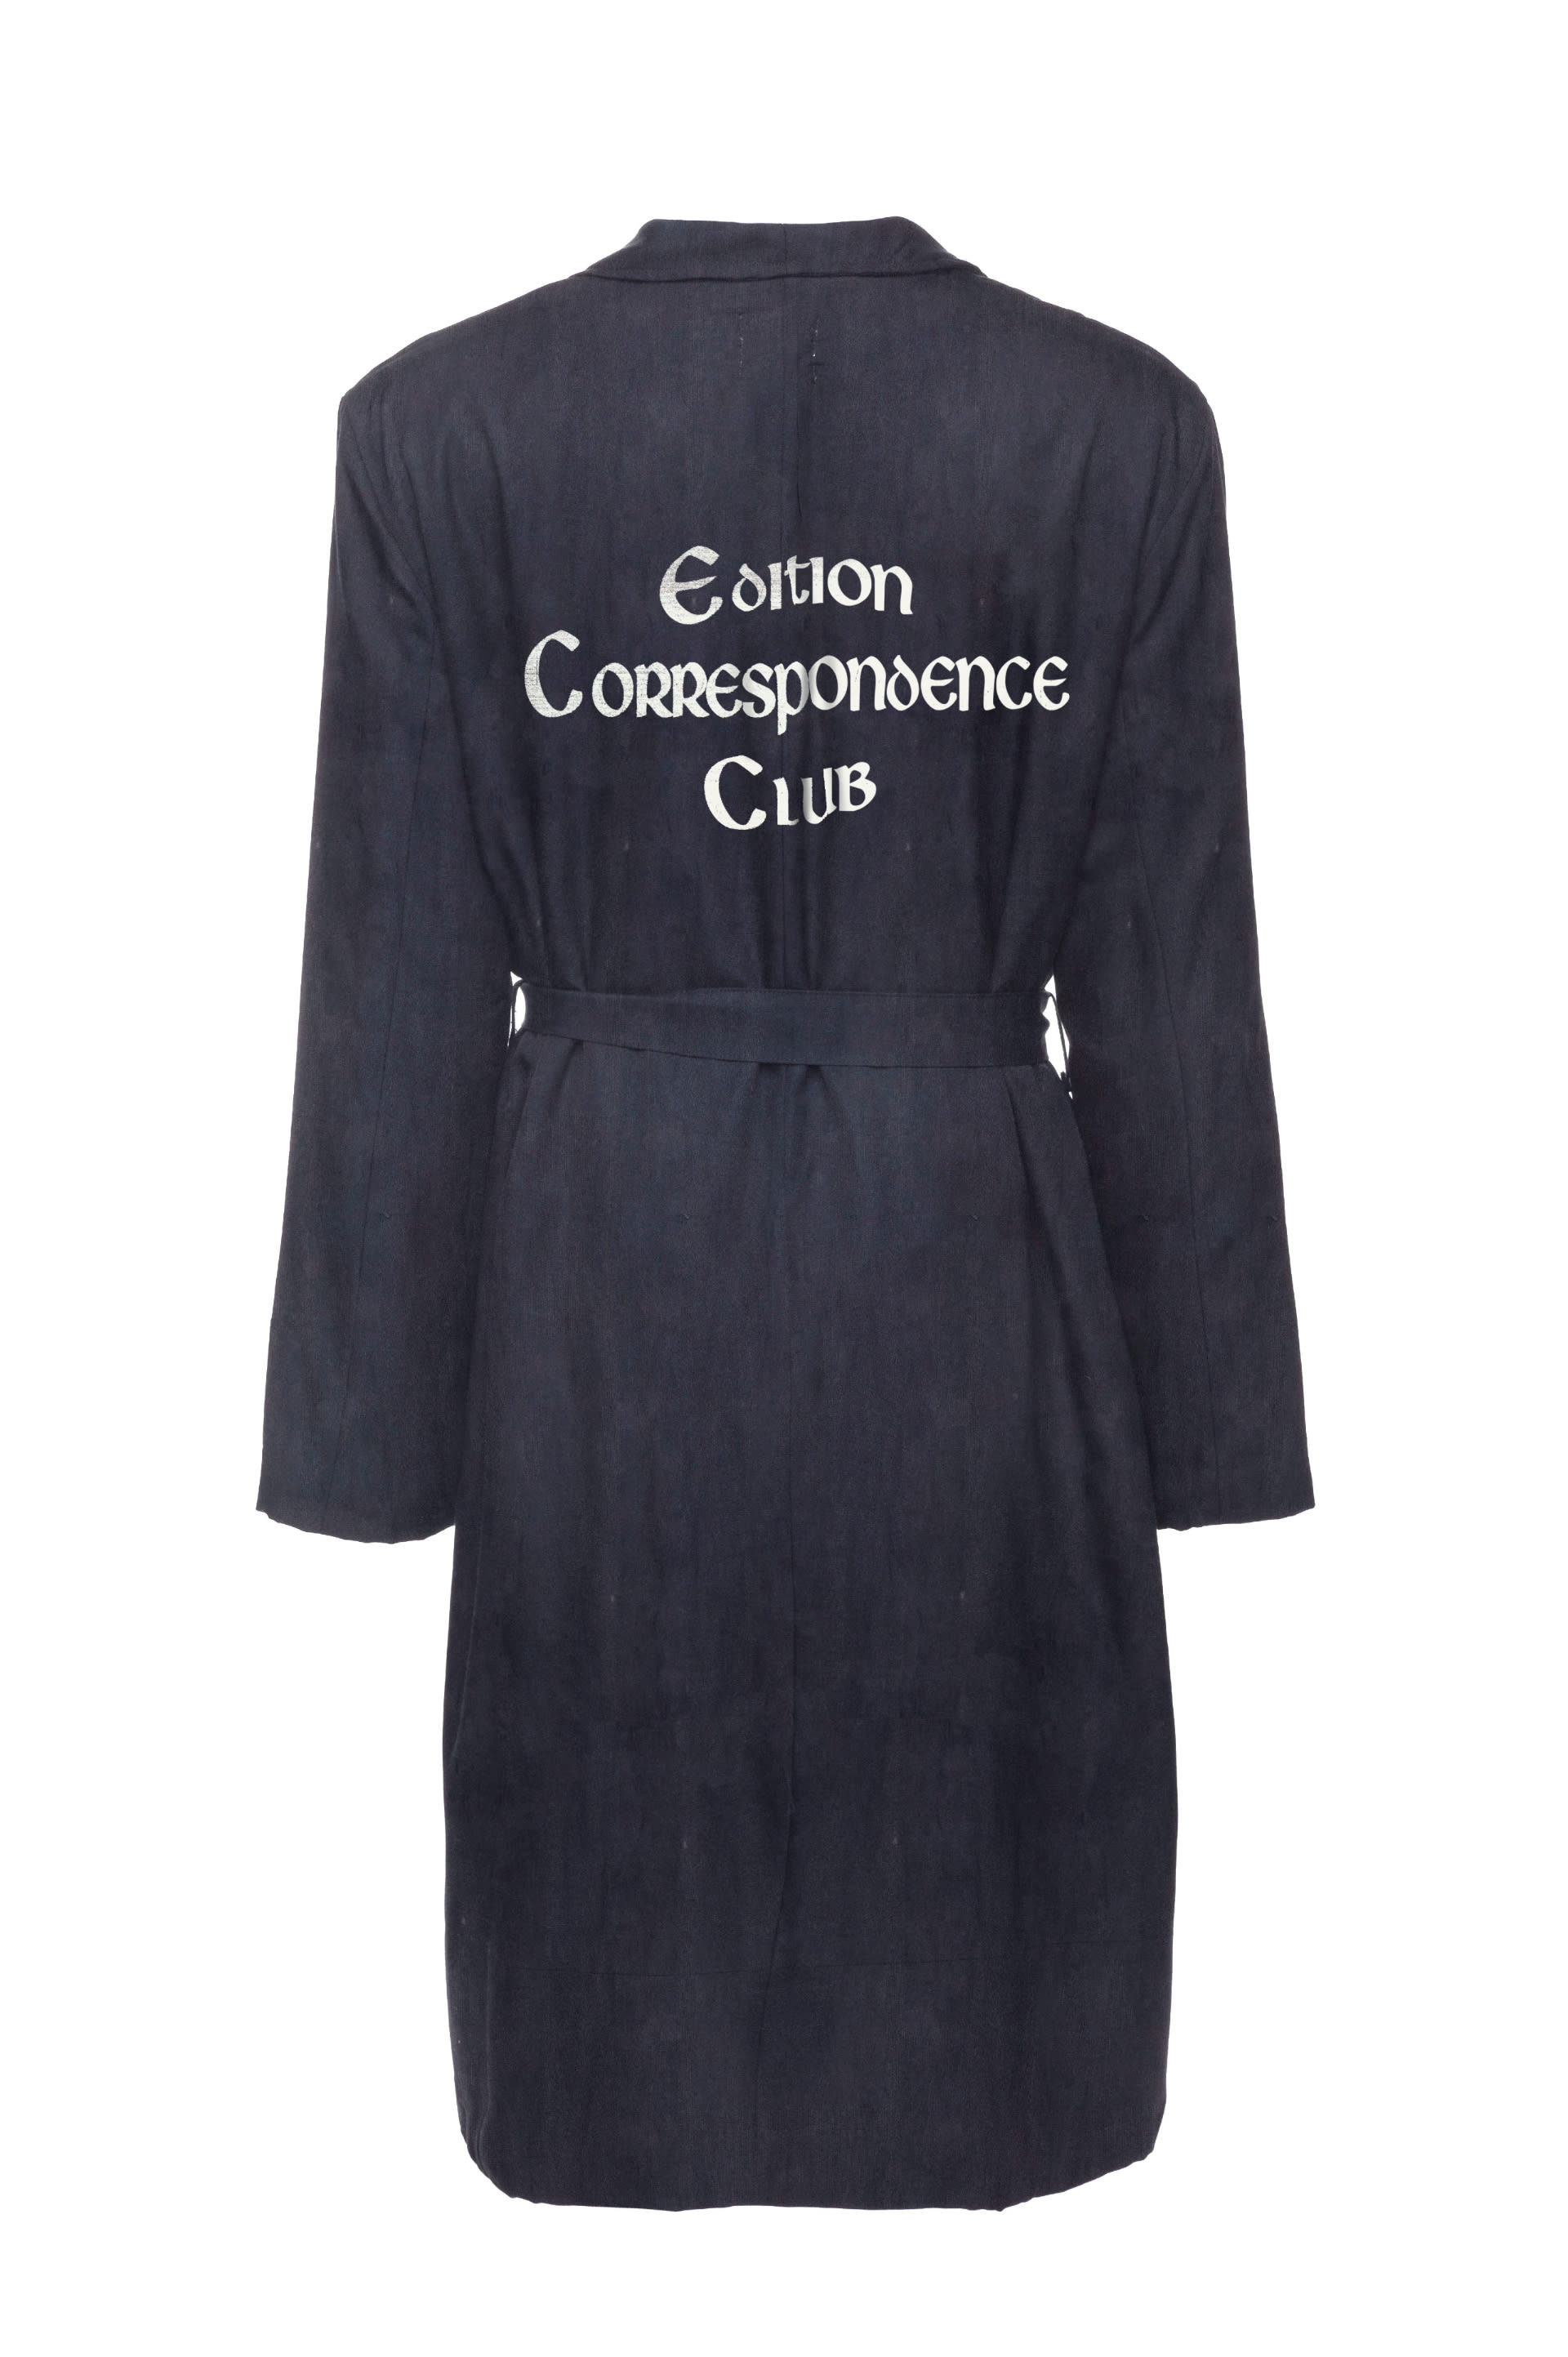 A black bath robe with the &quot;Edition Correspondece Club&quot; logo in white text across the back